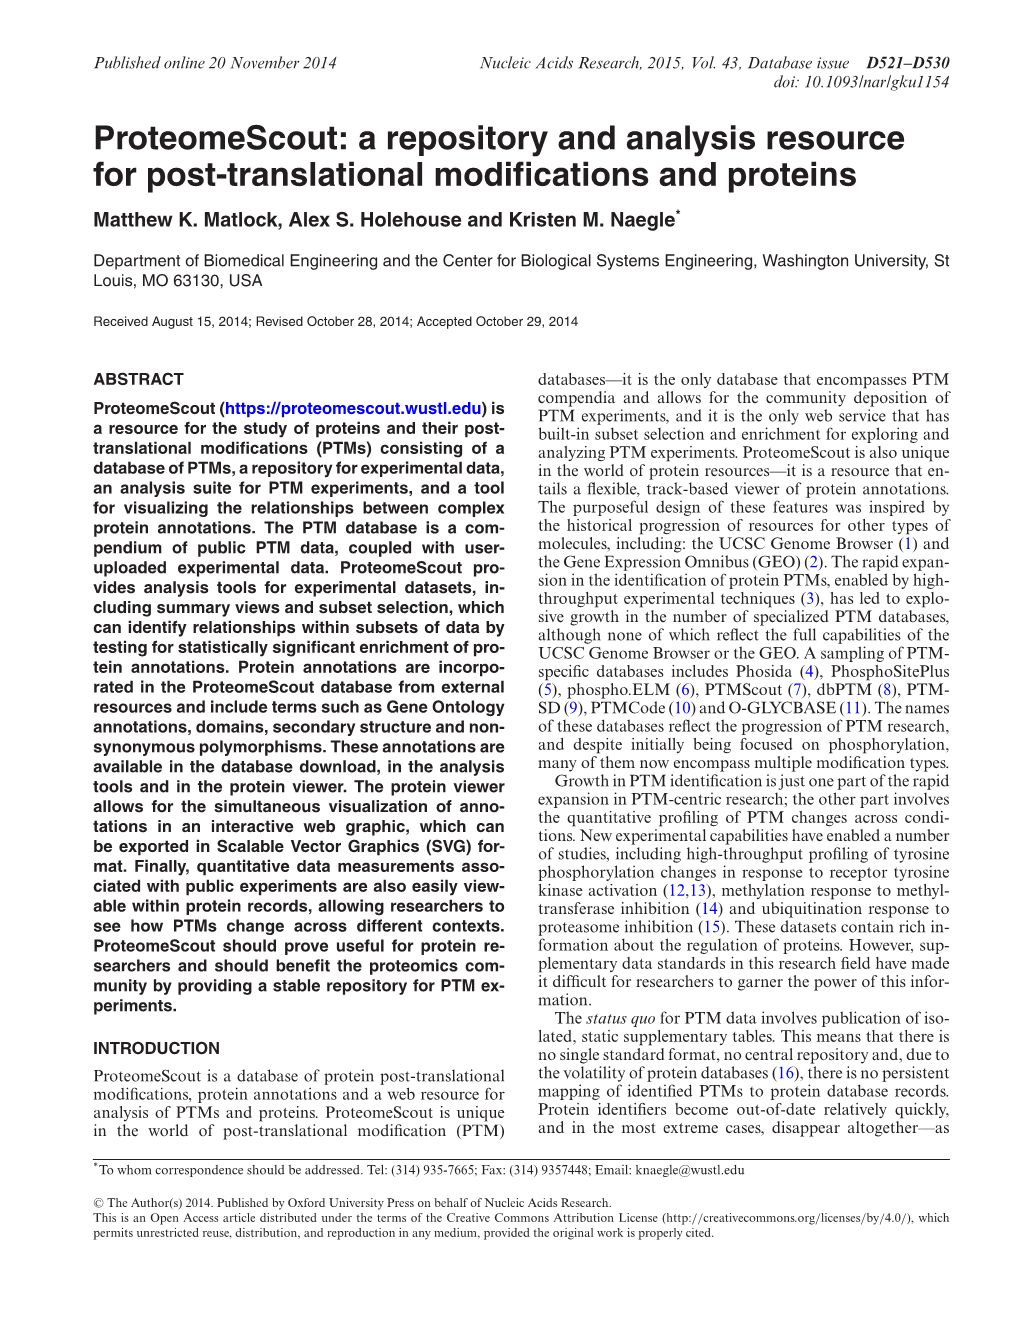 A Repository and Analysis Resource for Post-Translational Modifications And